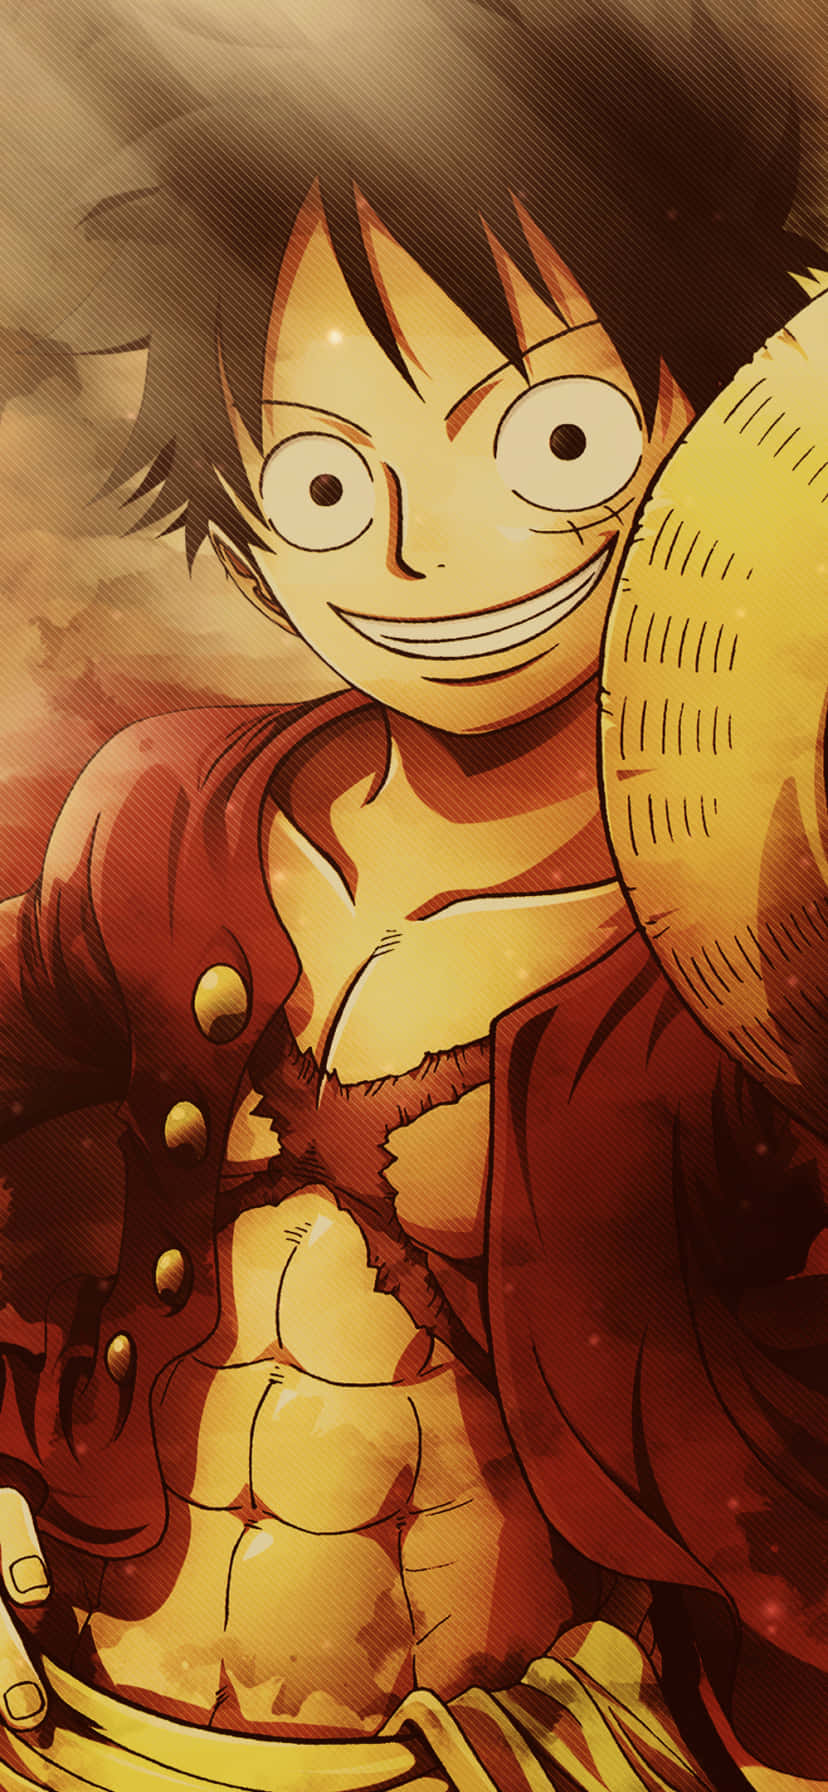 One Piece Luffy Iphone Smiling Portrait Background